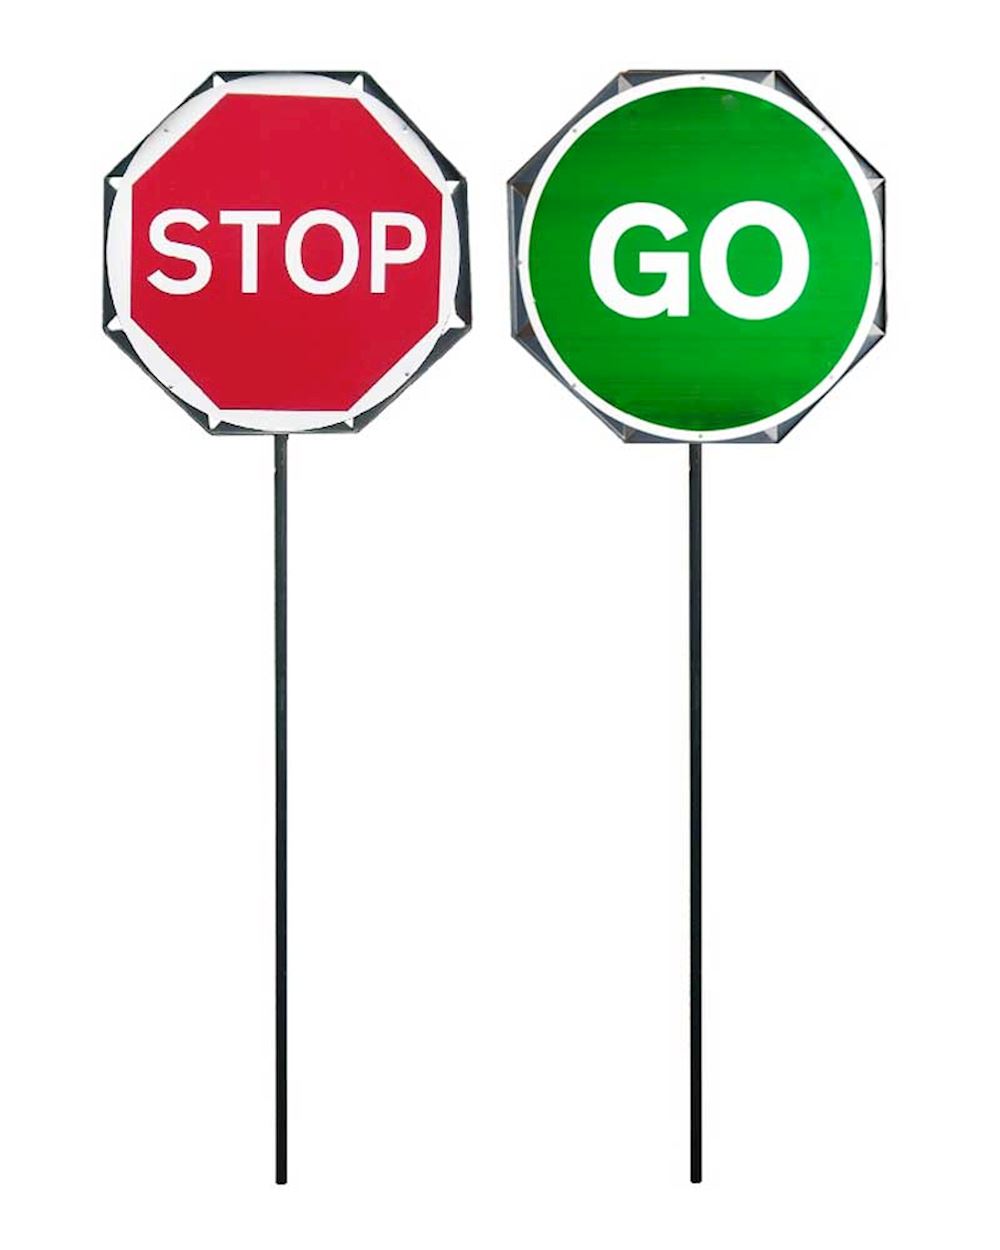 Stop & Go Sign